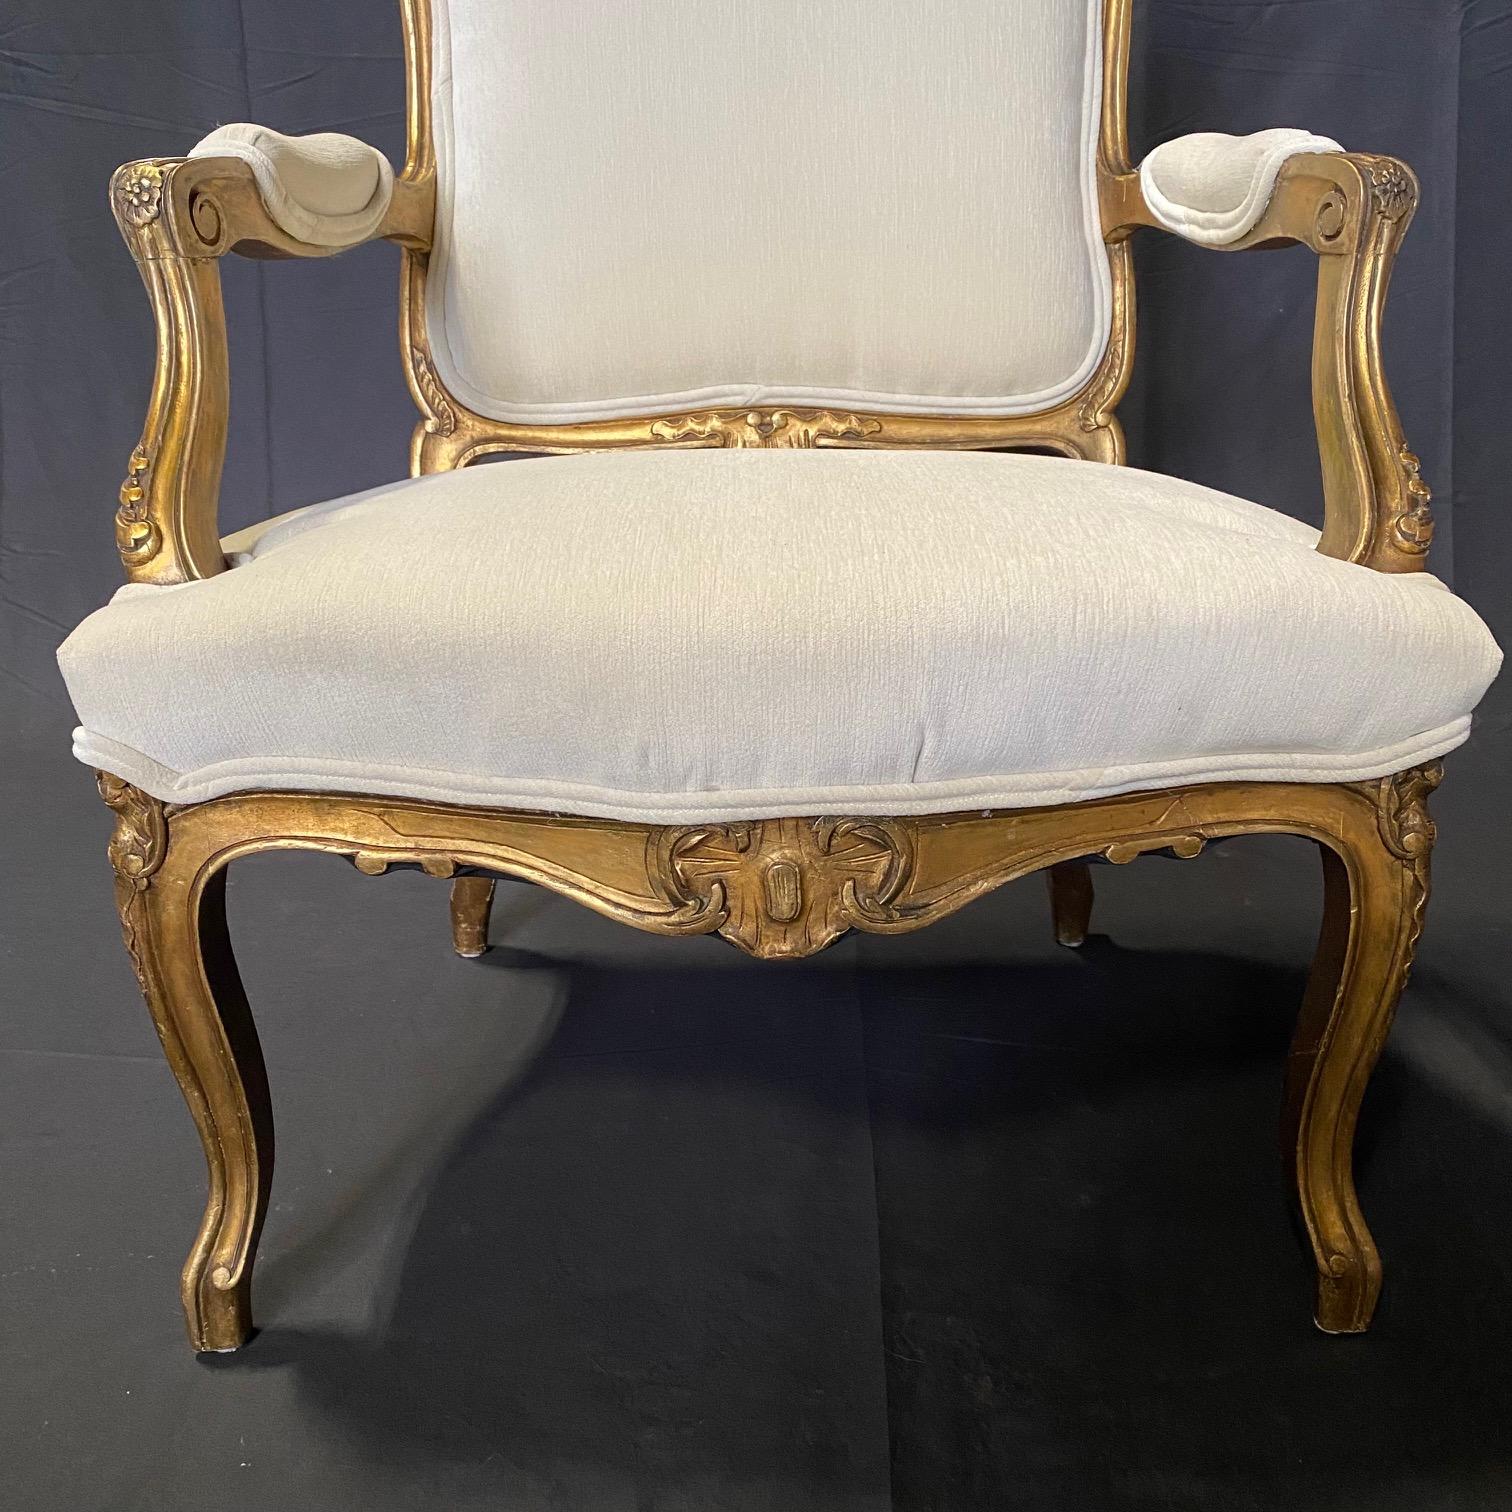  Pair of Antique French Louis XV Fauteuil Gilded Arm Chairs  2